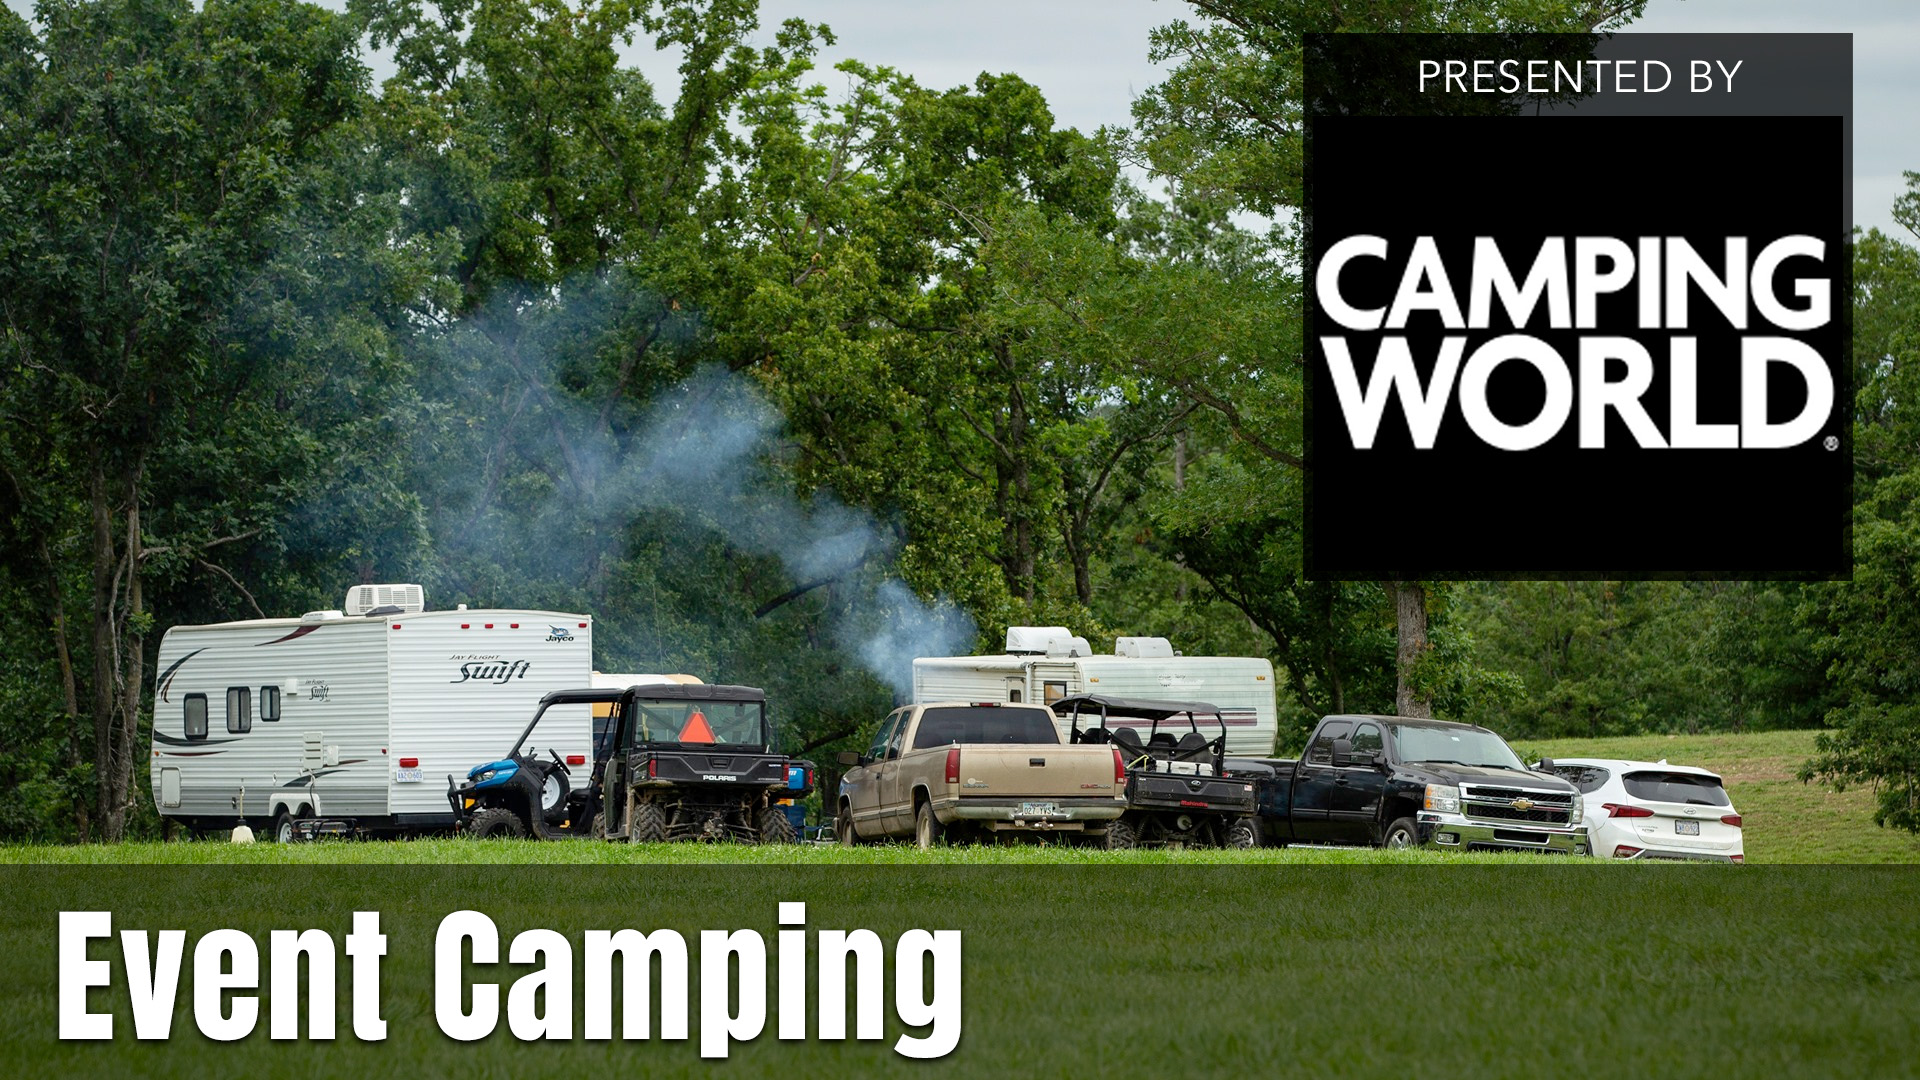 Event Camping presented by Camping World